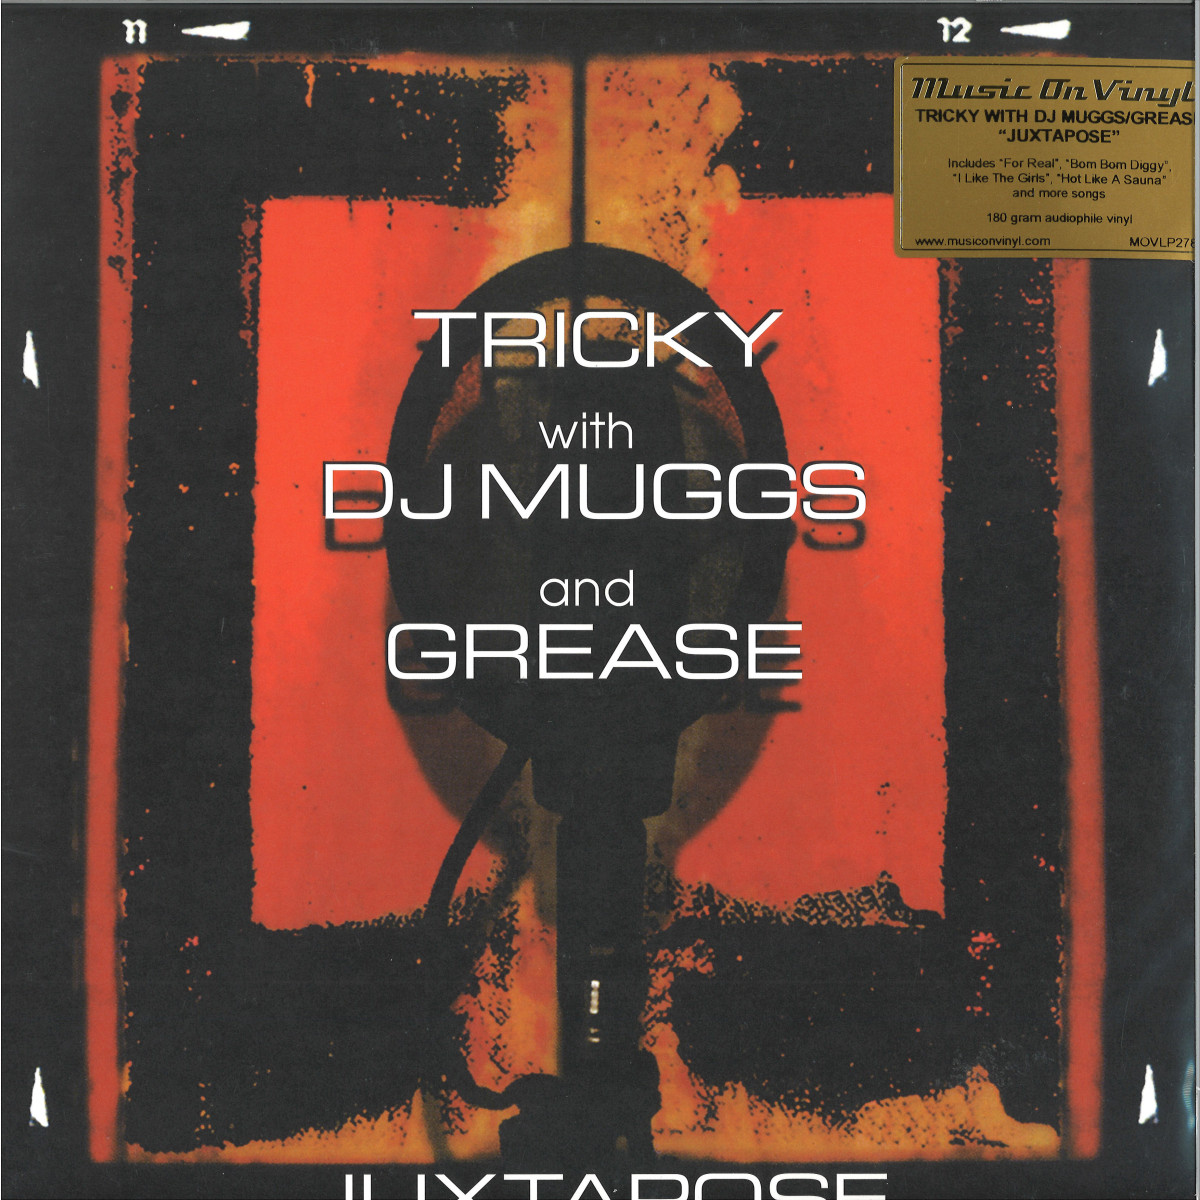 Tricky (with DJ Muggs and Grease) - Juxtapose LP / Music On Vinyl MOVLP2783  - Vinyl